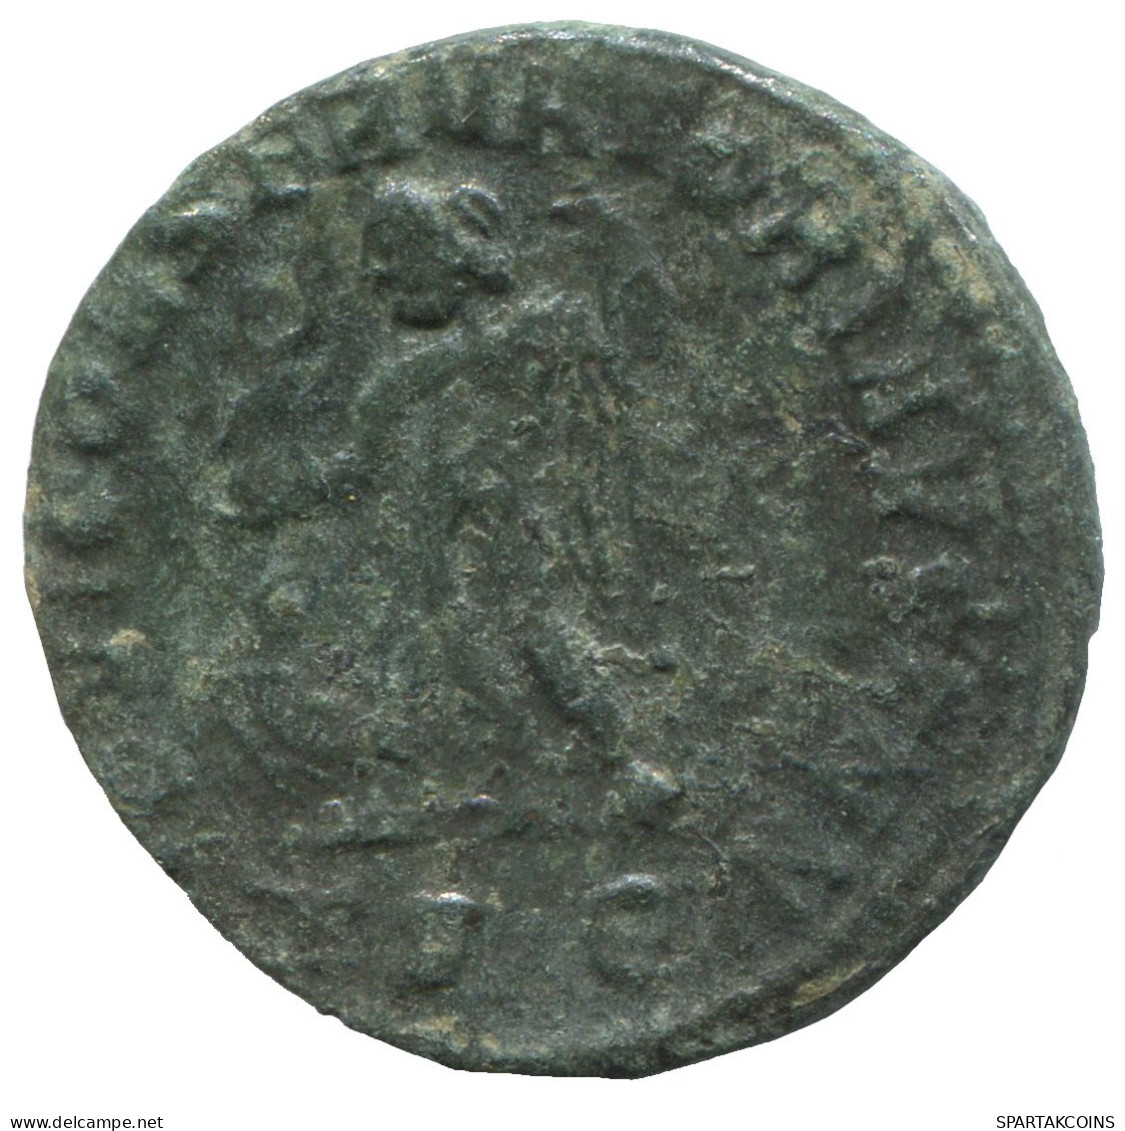 CONSTANTINE I (THE GREAT) Antioch J ϵ Jupiter&Victory 3.7g/24mm #SAV1055.9.E.A - The Christian Empire (307 AD To 363 AD)